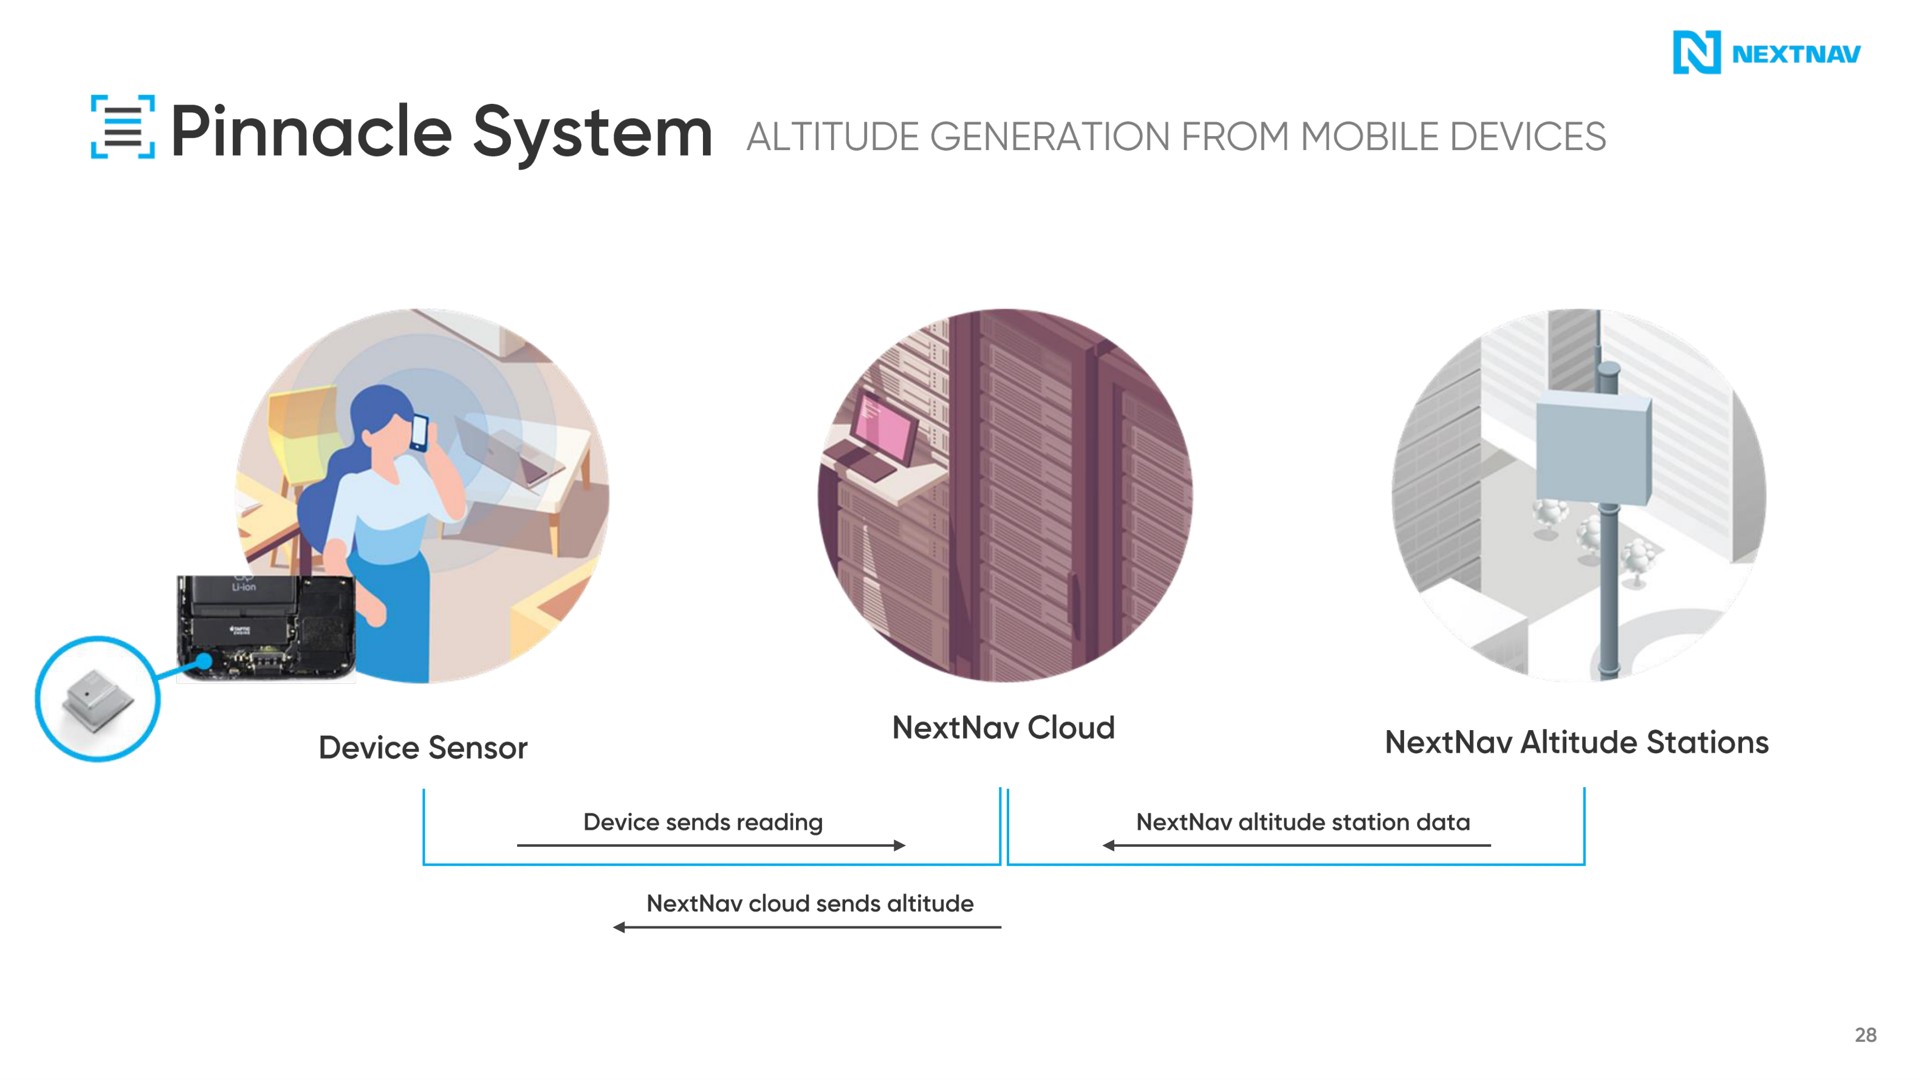 pinnacle system altitude generation from mobile devices | NextNav